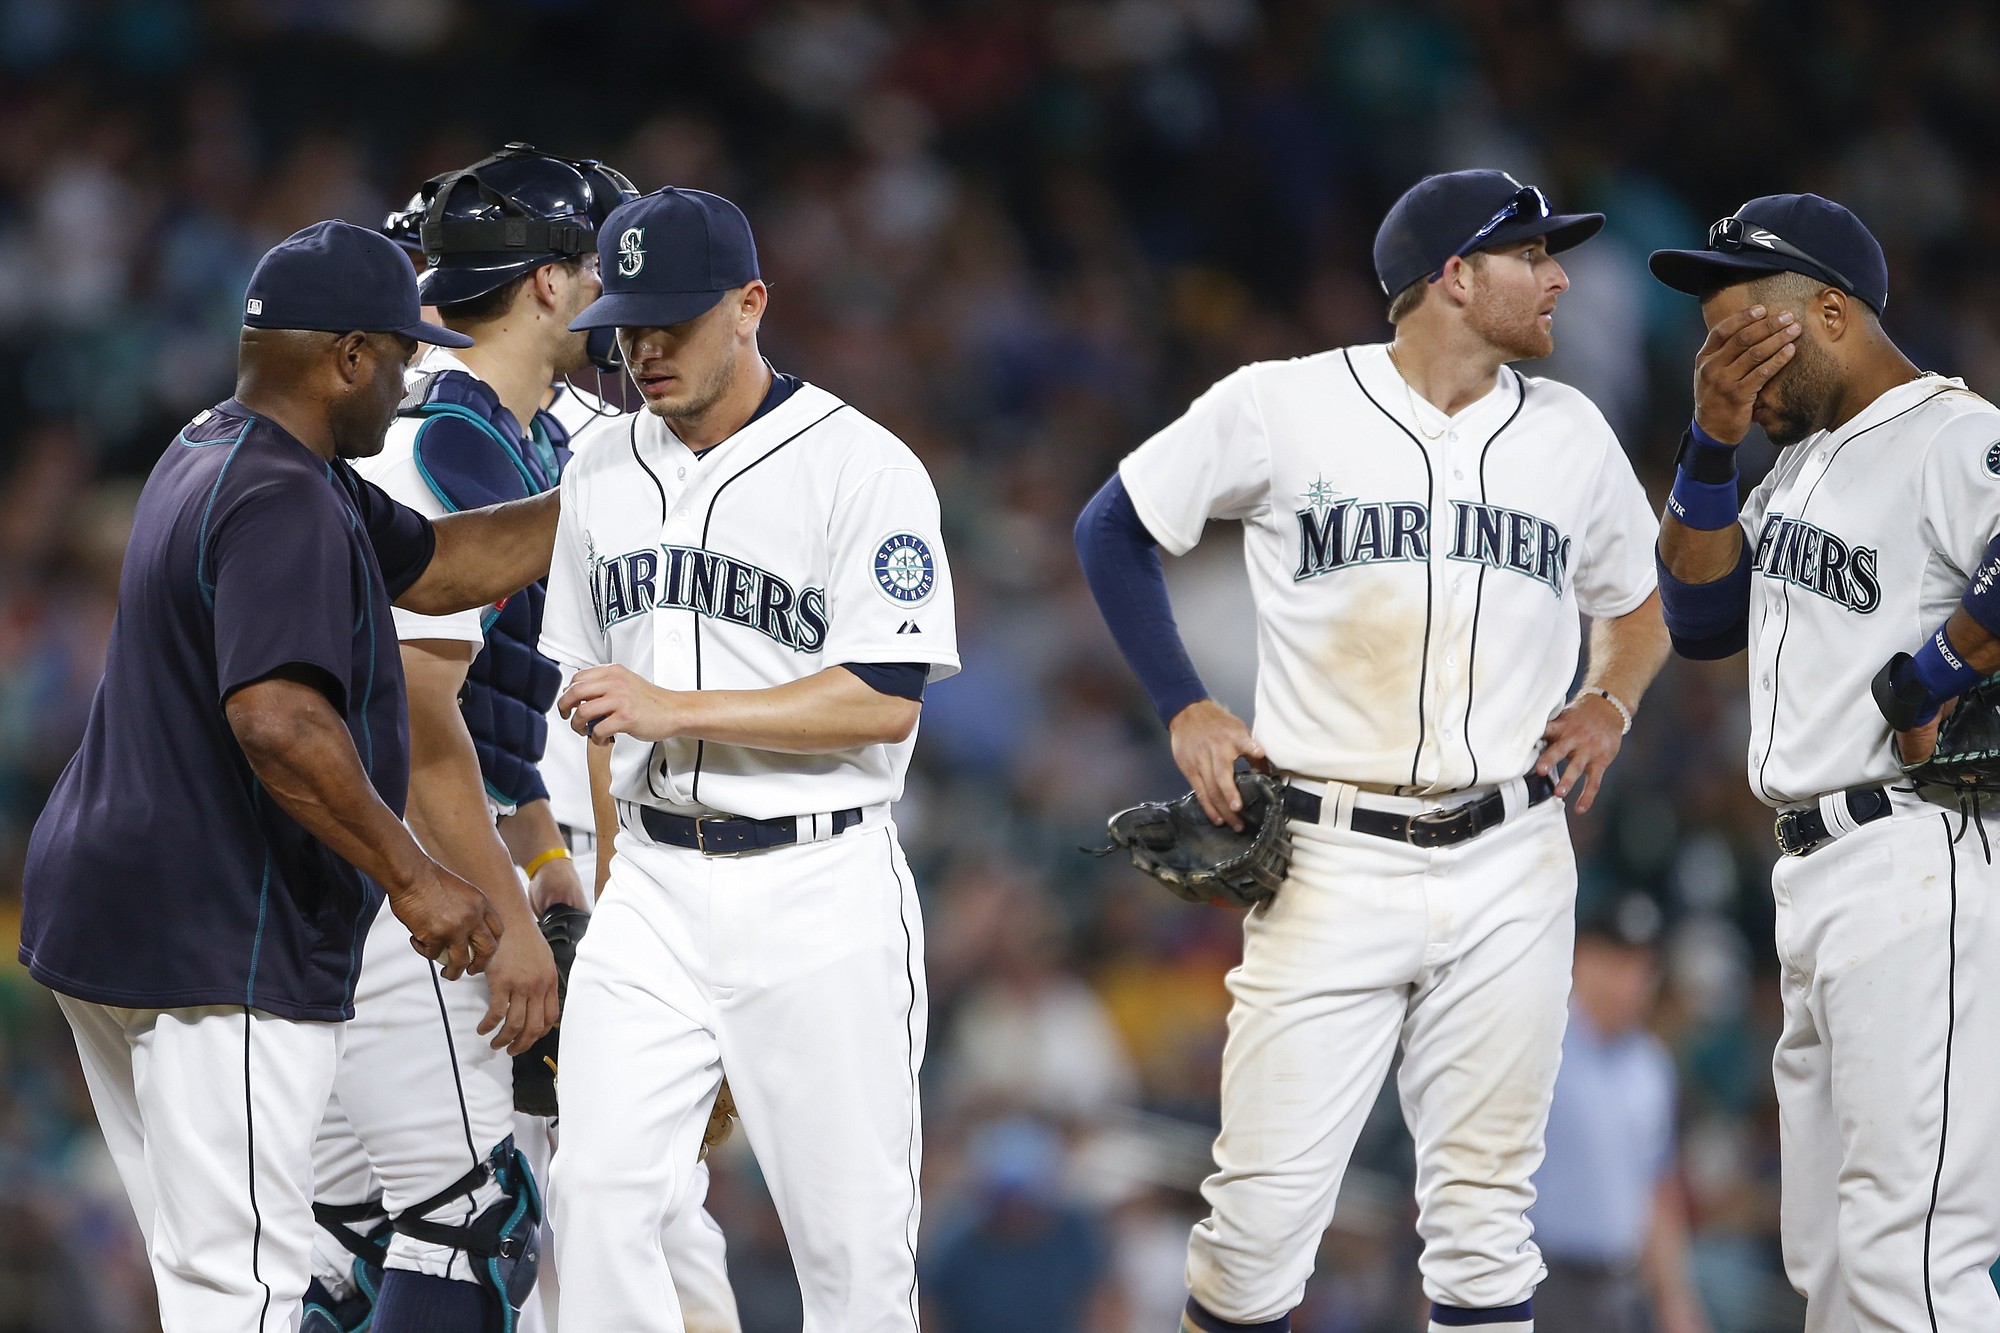 Seattle Mariners pitcher Rob Rasmussen, third from right, walks to the dugout after being relieved for by manager Lloyd McClendon, left, during the 11th inning Saturday, Aug. 8, 2015, in Seattle. Mariners shortstop Brad Miller, second from right, and second baseman Robinson Cano, right, stand on the mound.